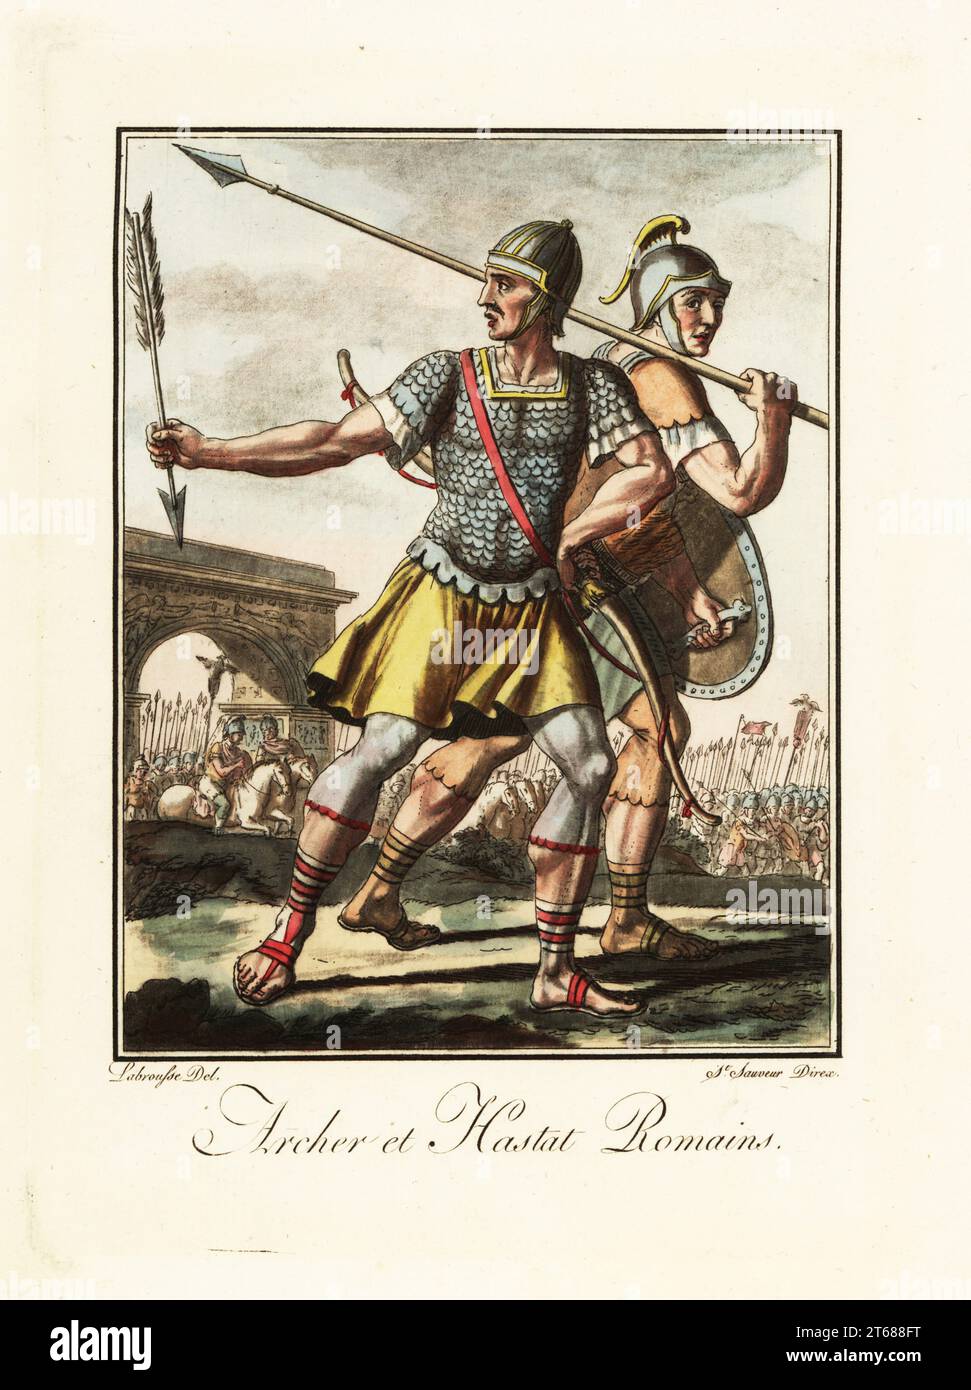 Roman archer sagittarius and spearman hastatus, ancient Rome. Bowman in galea helmet, lorica squamata or scale armour breastplate, tunic, sagulum gregale or short trousers, caligae hobnail sandals, armed with bow and arrow. Lancer armed with oval shield and spear. In the background a triumphal parade. Archer et Hastat Romains. Handcoloured copperplate drawn and engraved by L. Labrousse, artist of Bordeaux, under the direction of Jacques Grasset de Saint-Sauveur from his Lantique Rome, ou description historique et pittoresque, Ancient Rome, or historical and picturesque description, Chez Deroy, Stock Photo